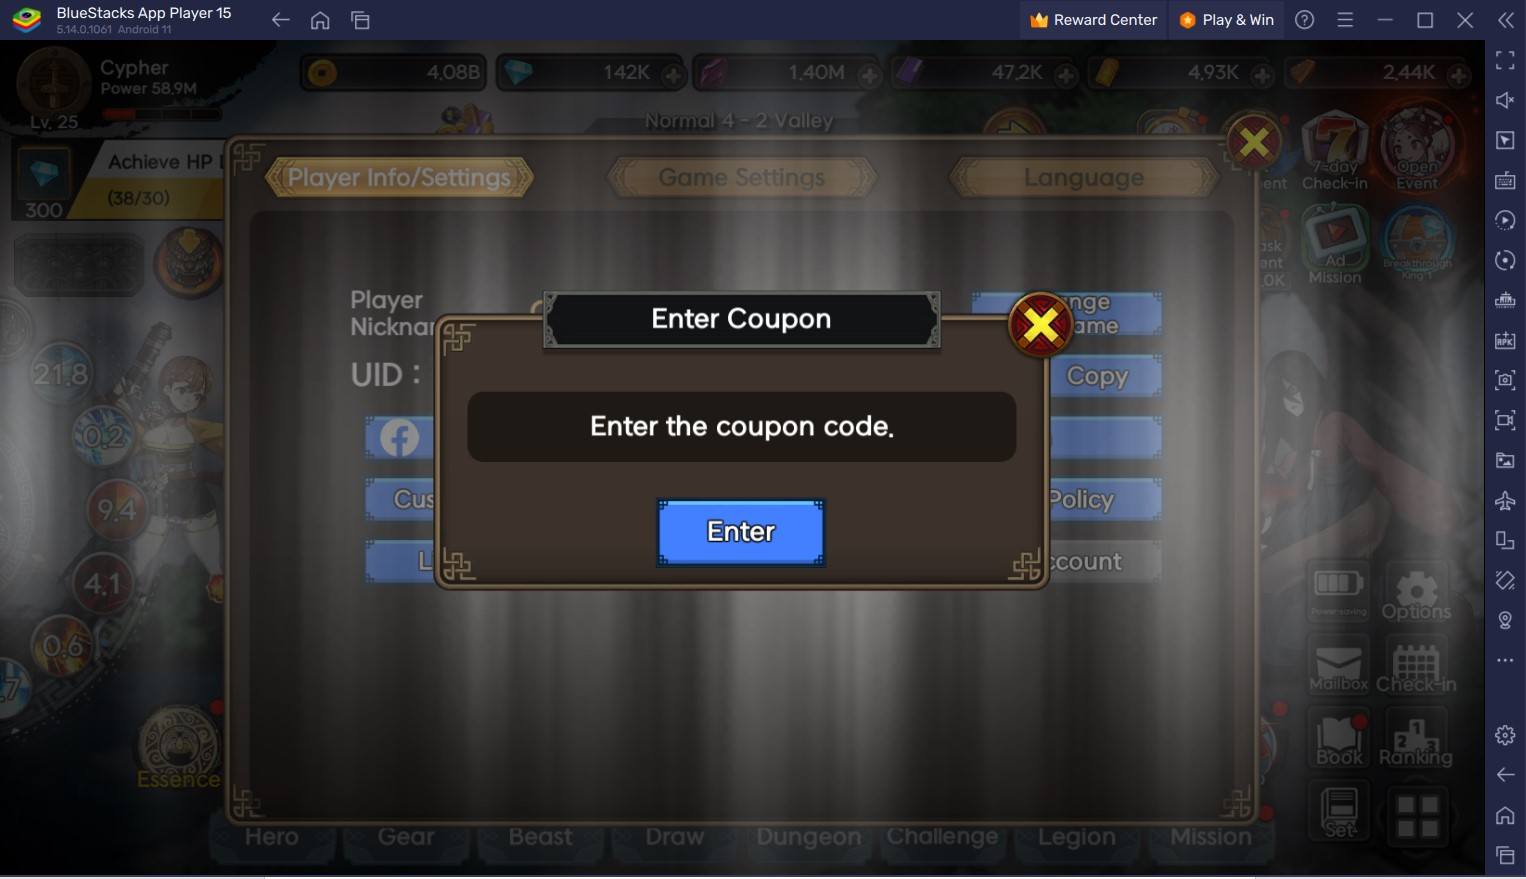 New Demon Slayer Idle RPG & All 3 Giftcodes - How to Redeem Code